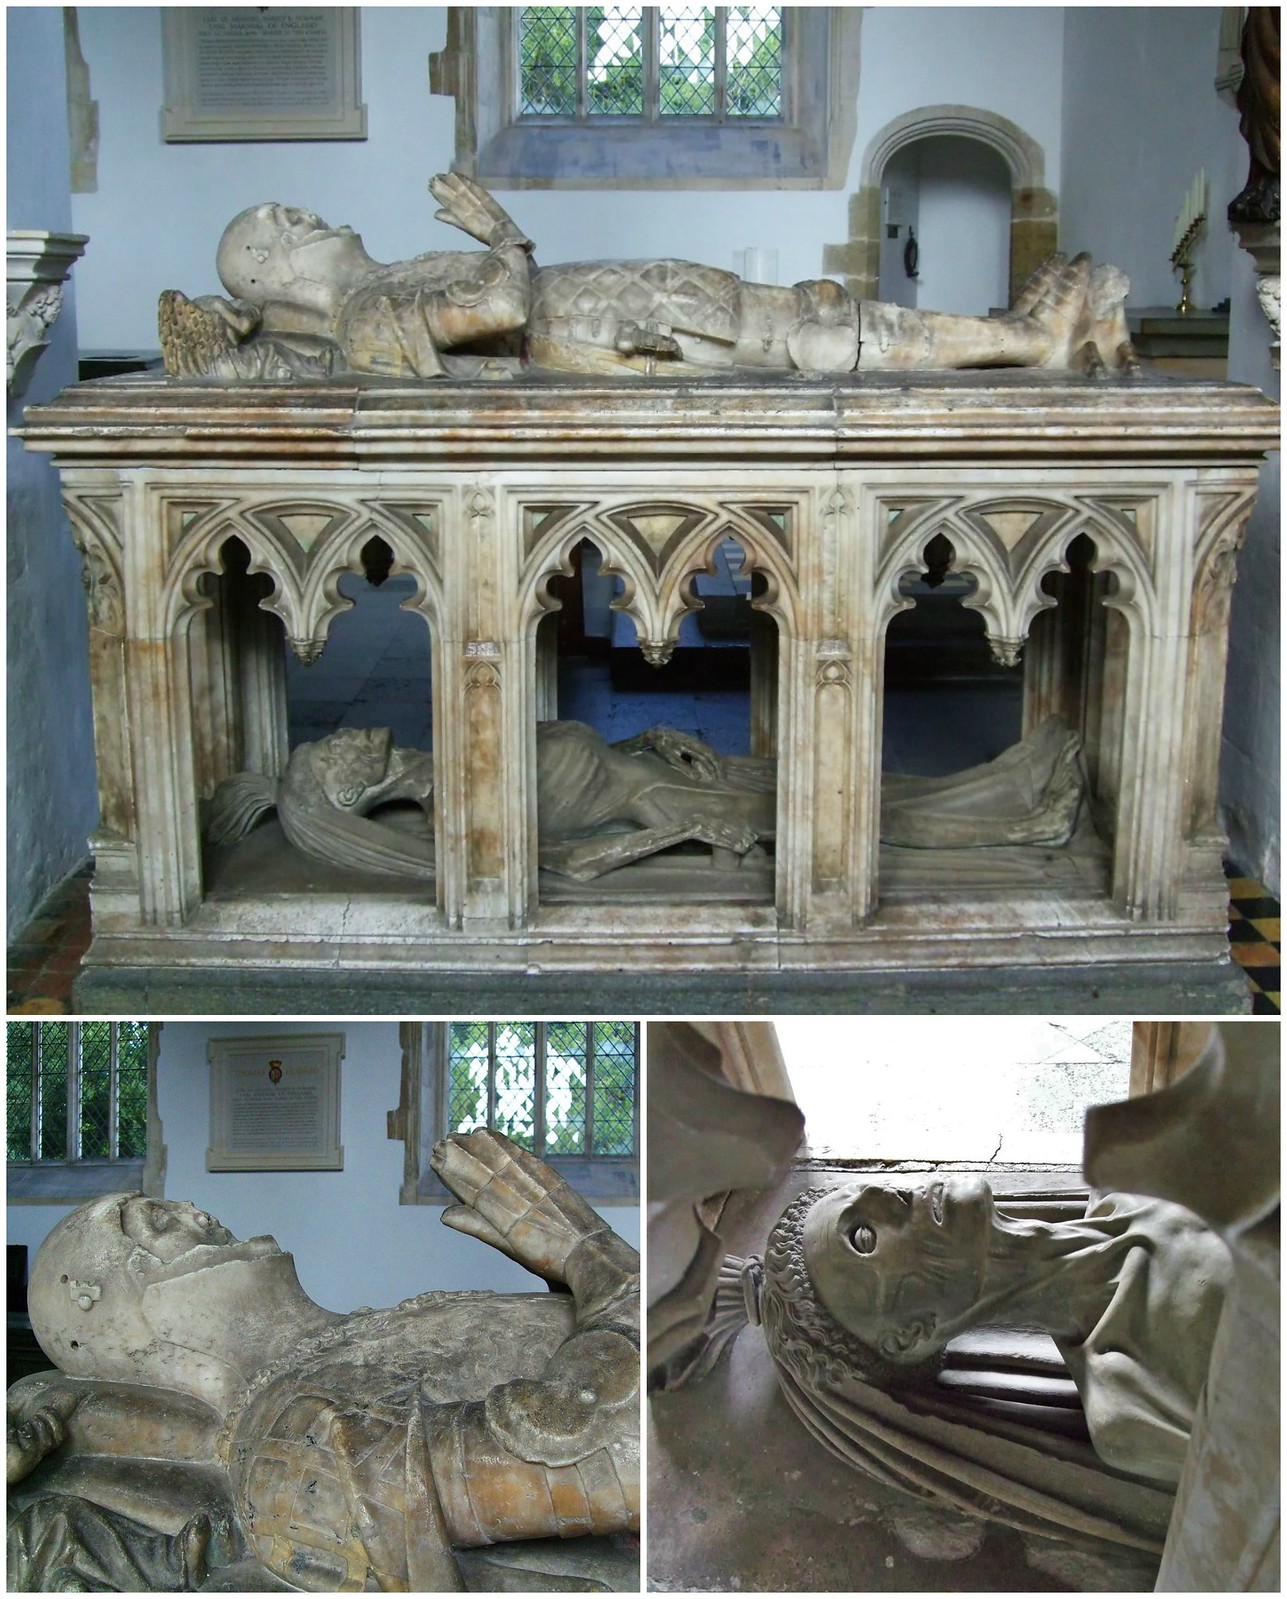 Tomb and effigy of John FitzAlan, 14th Earl of Arundel (died 1435), in the Fitzalan Chapel at Arundel. Credit Lampman